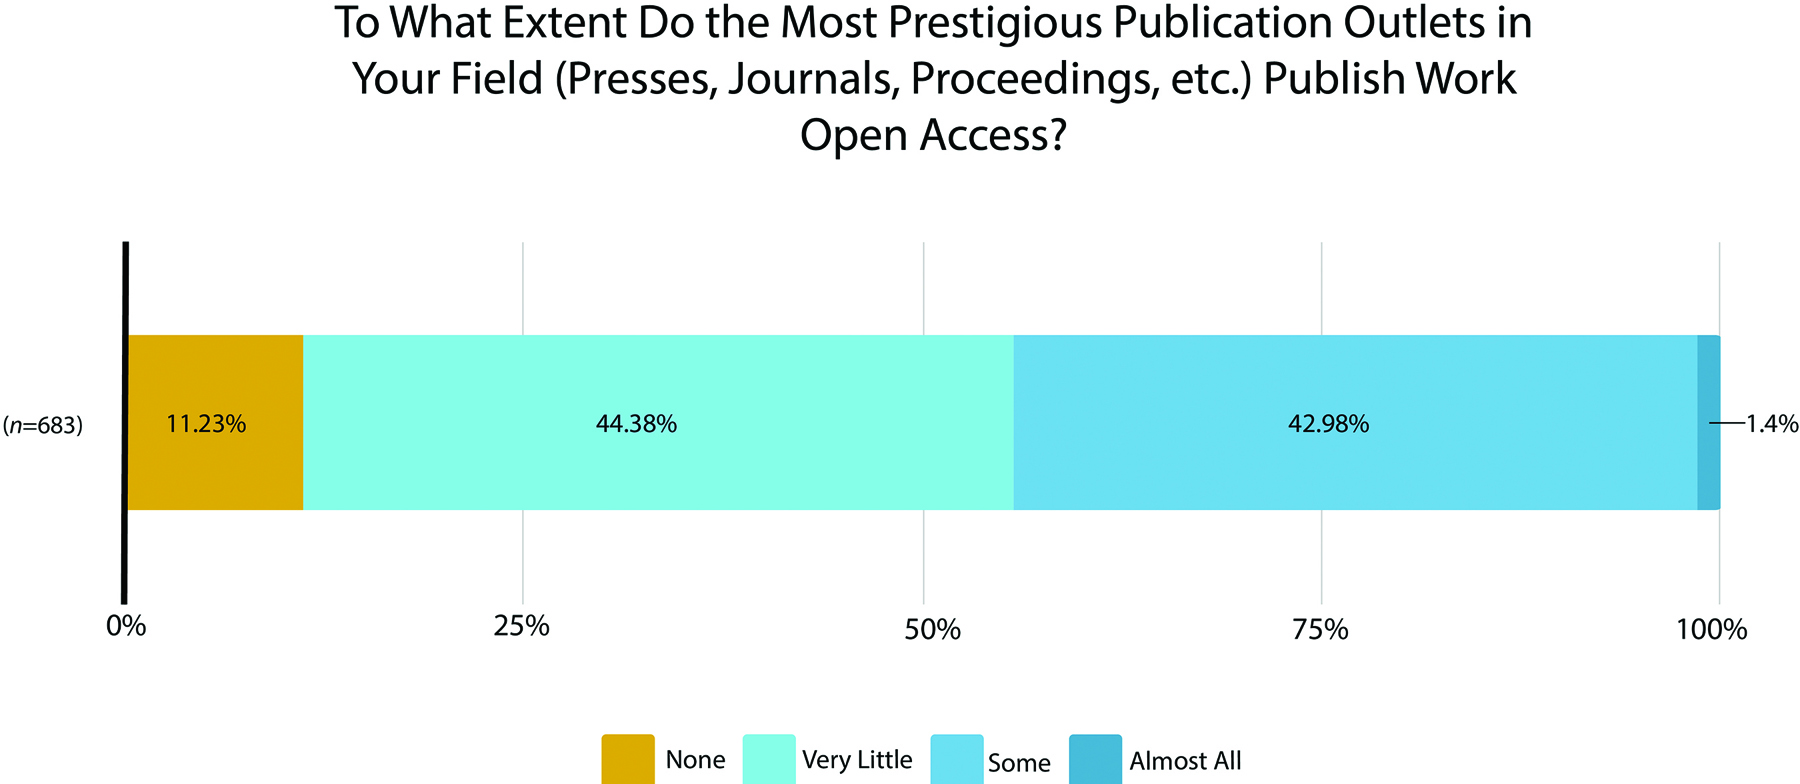 A stacked bar chart that represents answers to the question “To What Extent do the Most Prestigious Publication Outlets in your Field (Presses, Journals, Proceedings, etc.) Publish Work Open Access?” The chart displays answers from the entire survey population (where n=683) as a single bar. 11.23% of respondents answered “none”. 44.38% of respondents answered “very little”. 42.98% said “some” and 1.40% of respondents said “all”.